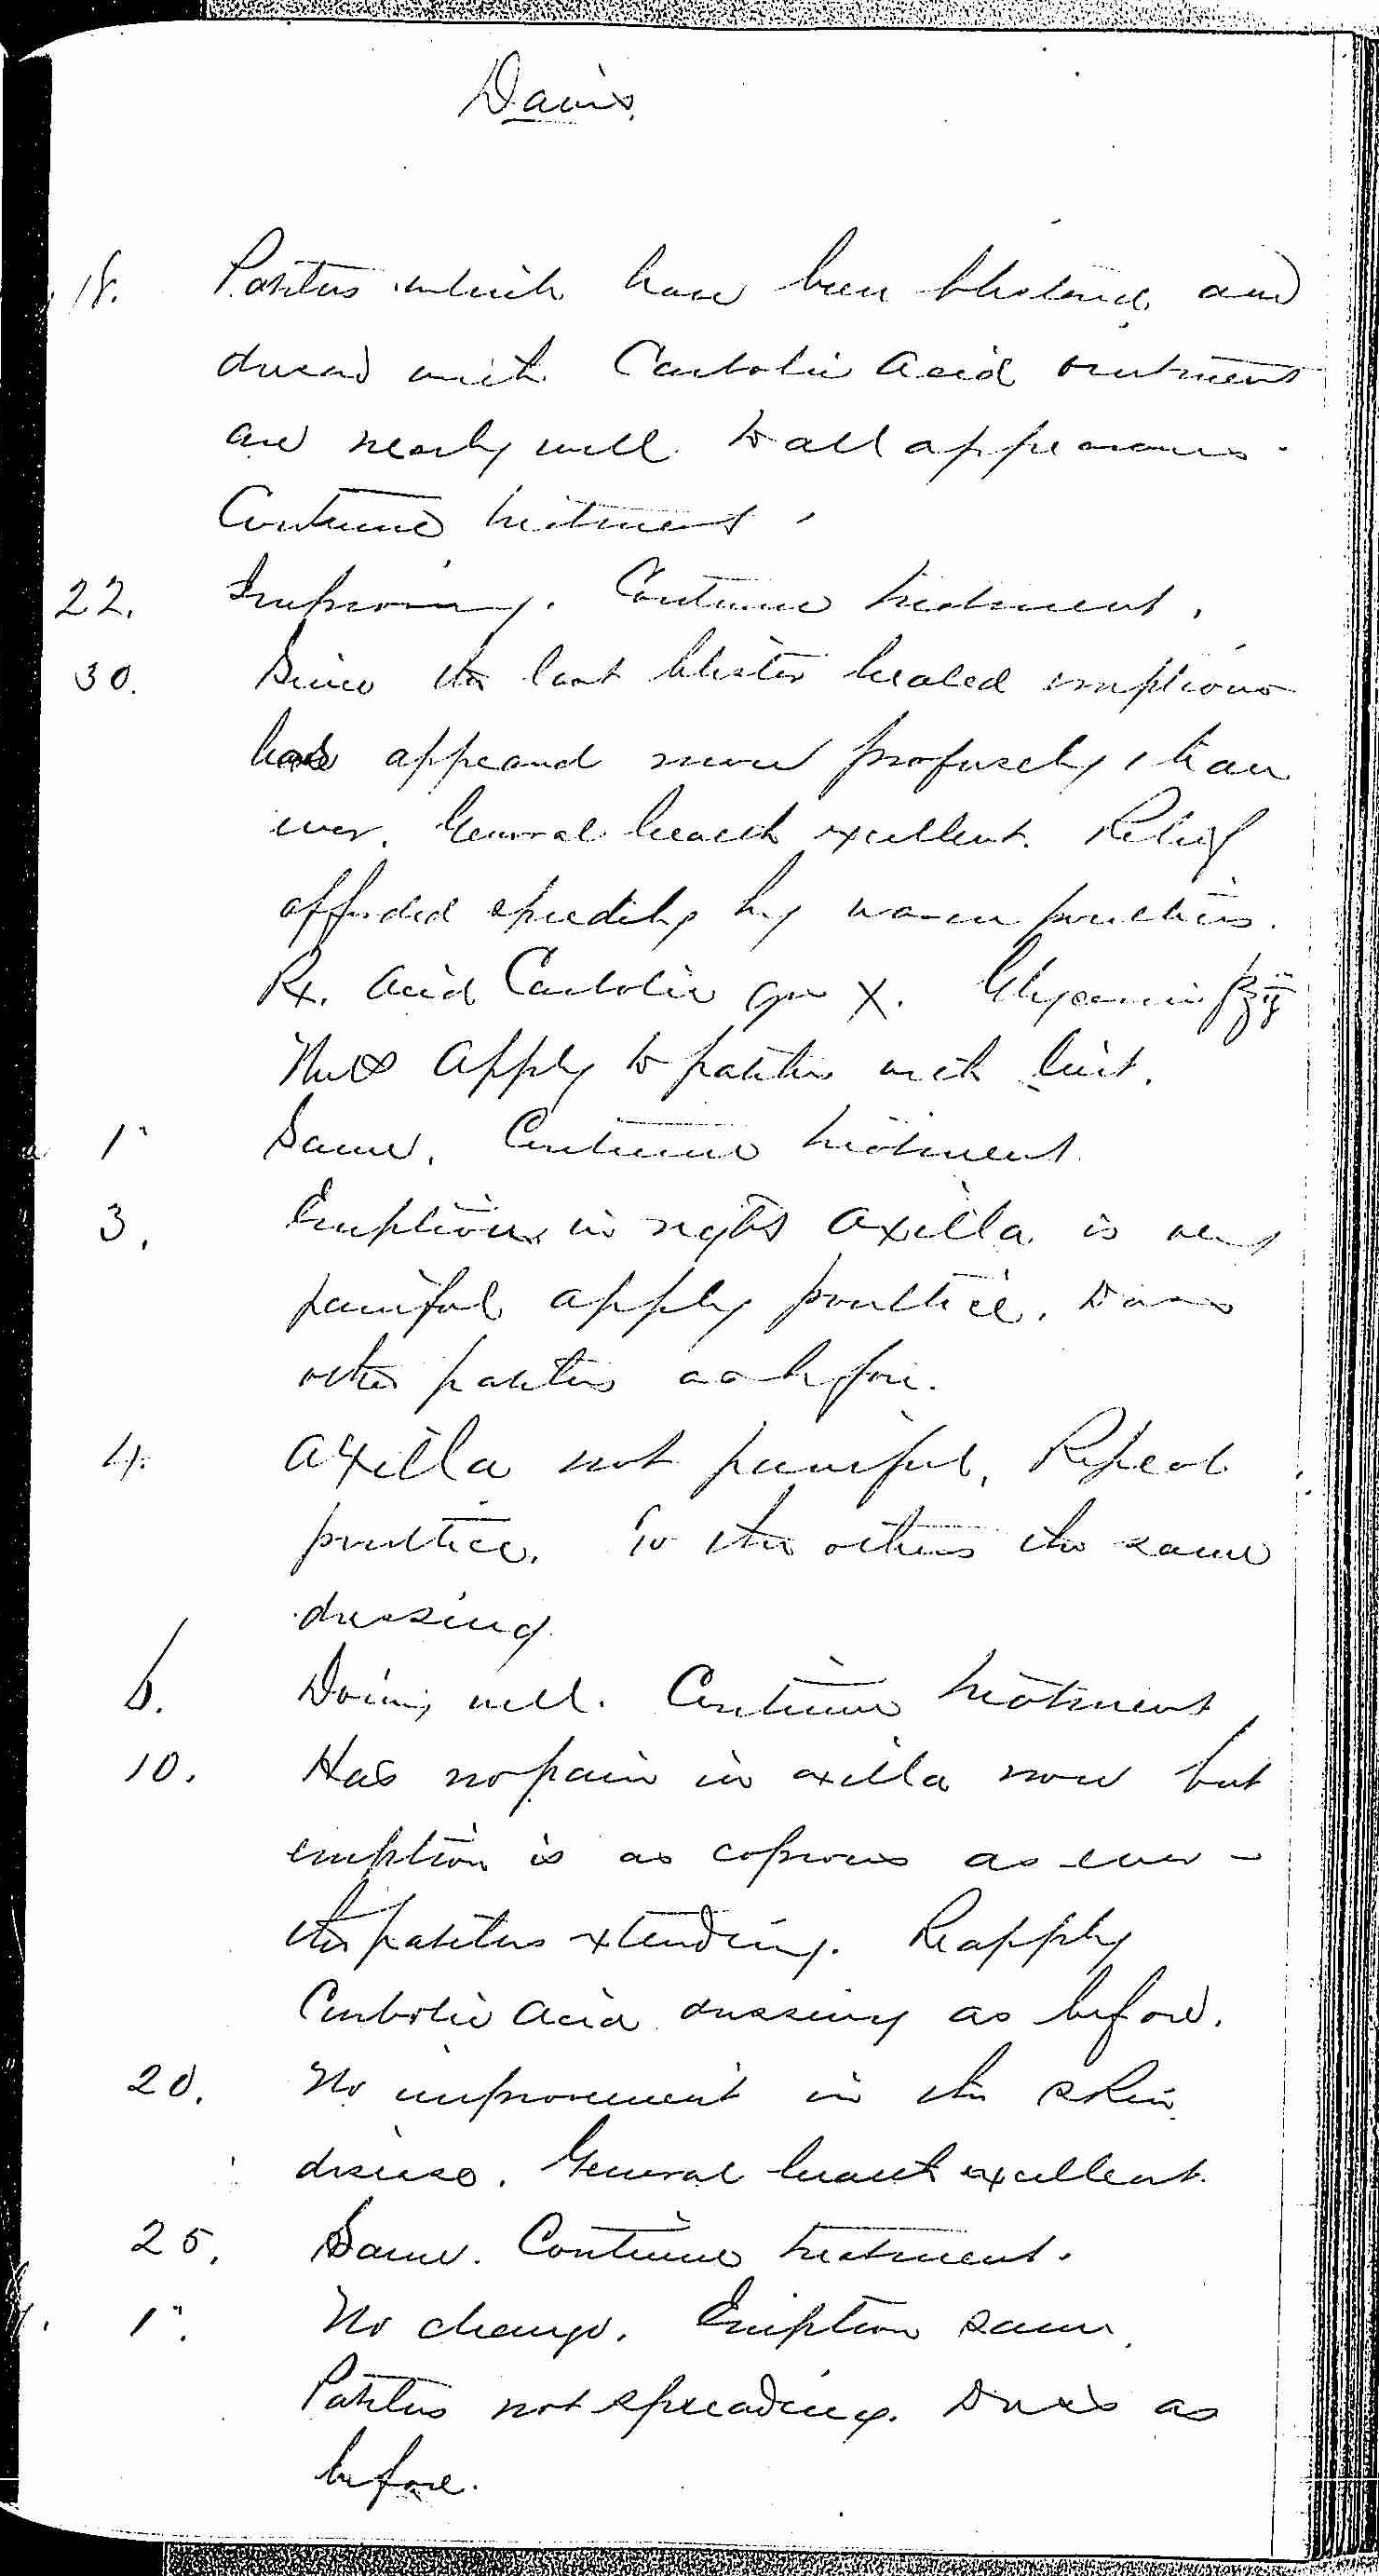 Entry for Edward Davis (page 5 of 6) in the log Hospital Tickets and Case Papers - Naval Hospital - Washington, D.C. - 1868-69